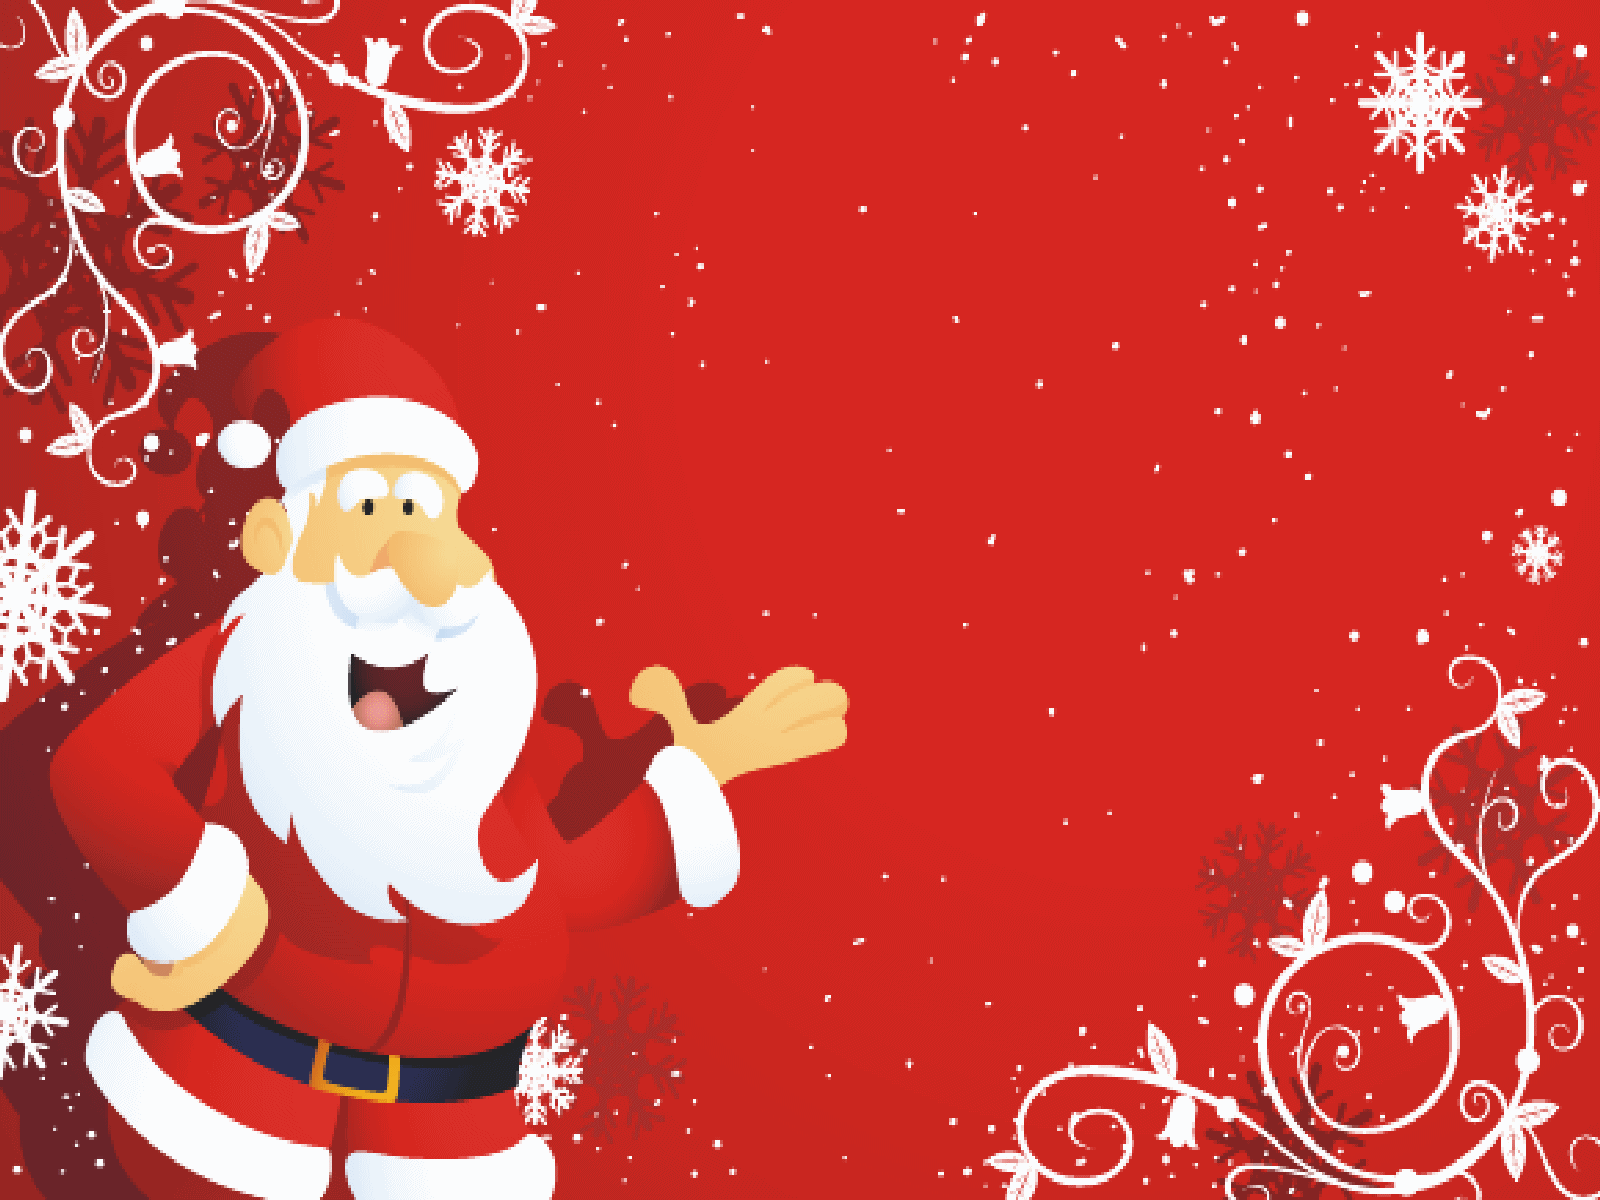 Best christmas Pictures HD Christmas Wallpapers Desktop Backgrounds